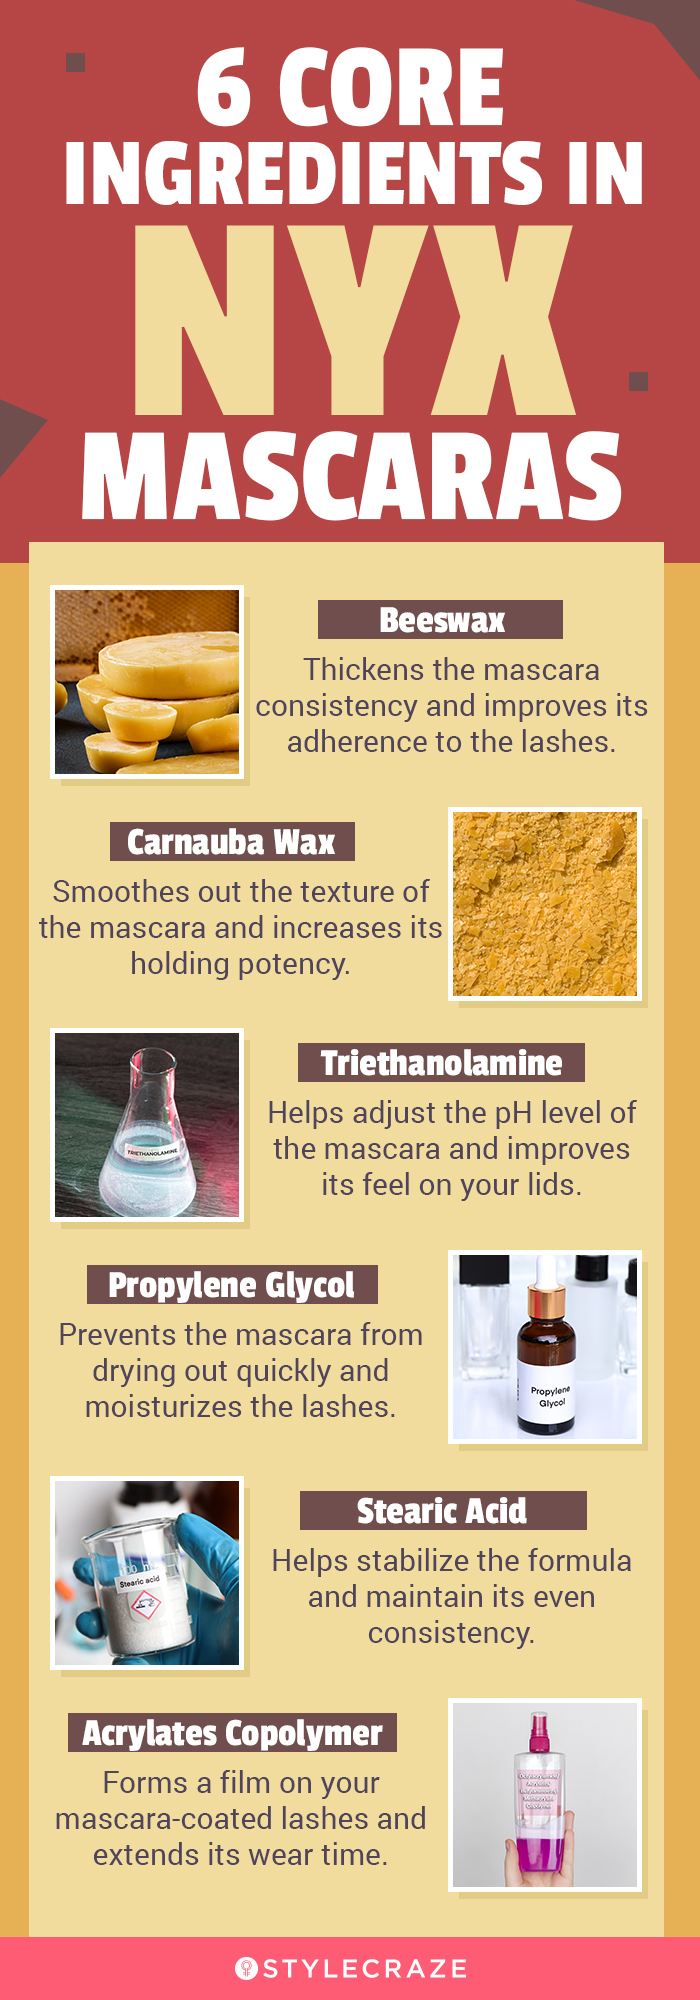 6 Core Ingredients In NYX Mascaras(infographic)